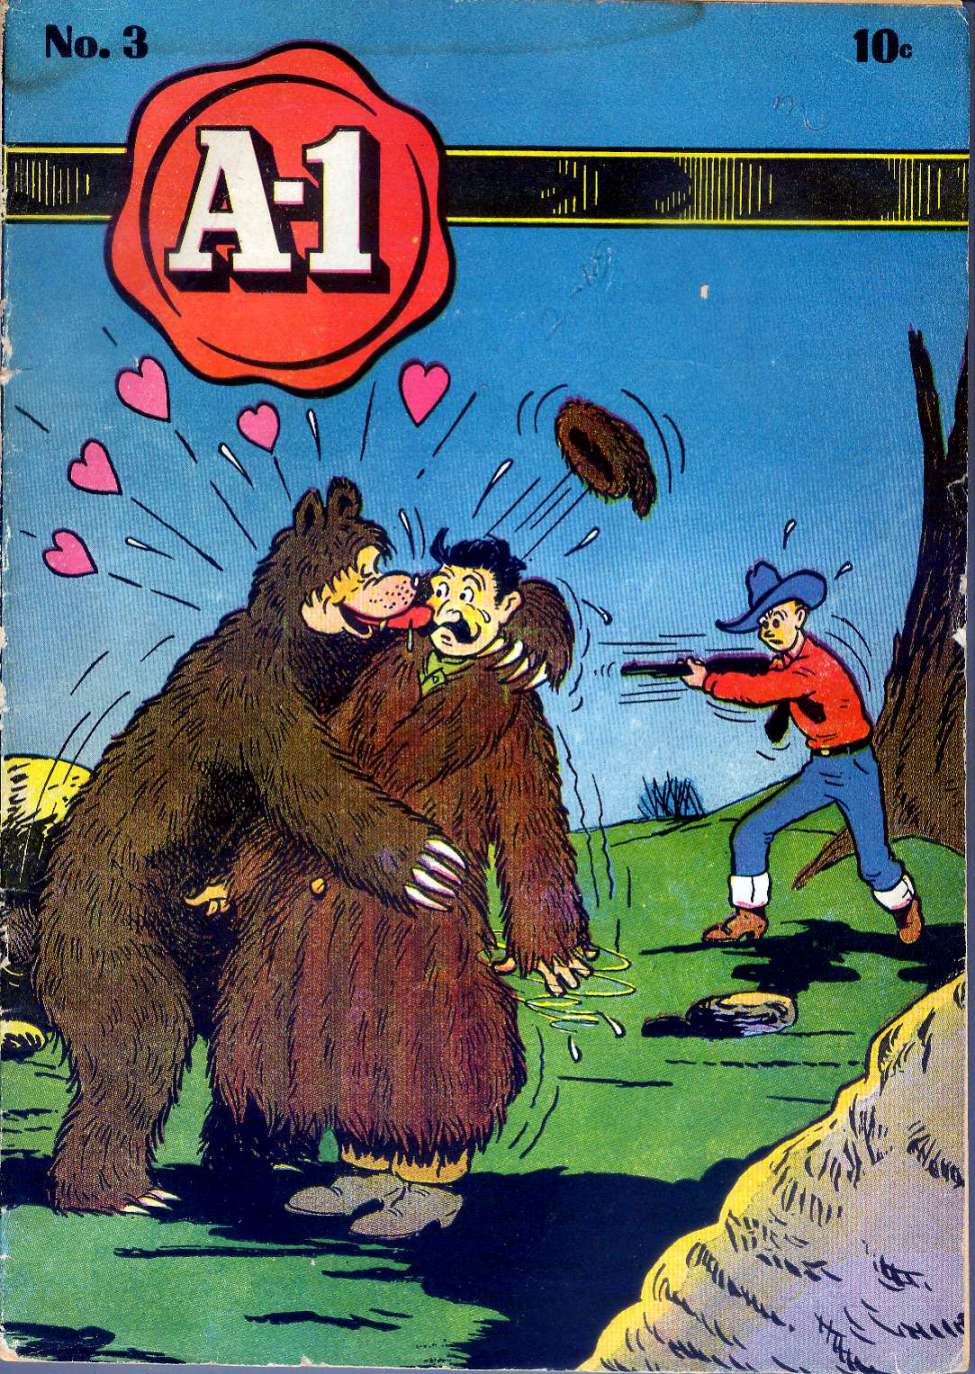 Book Cover For A-1 Comics 3 - Version 1